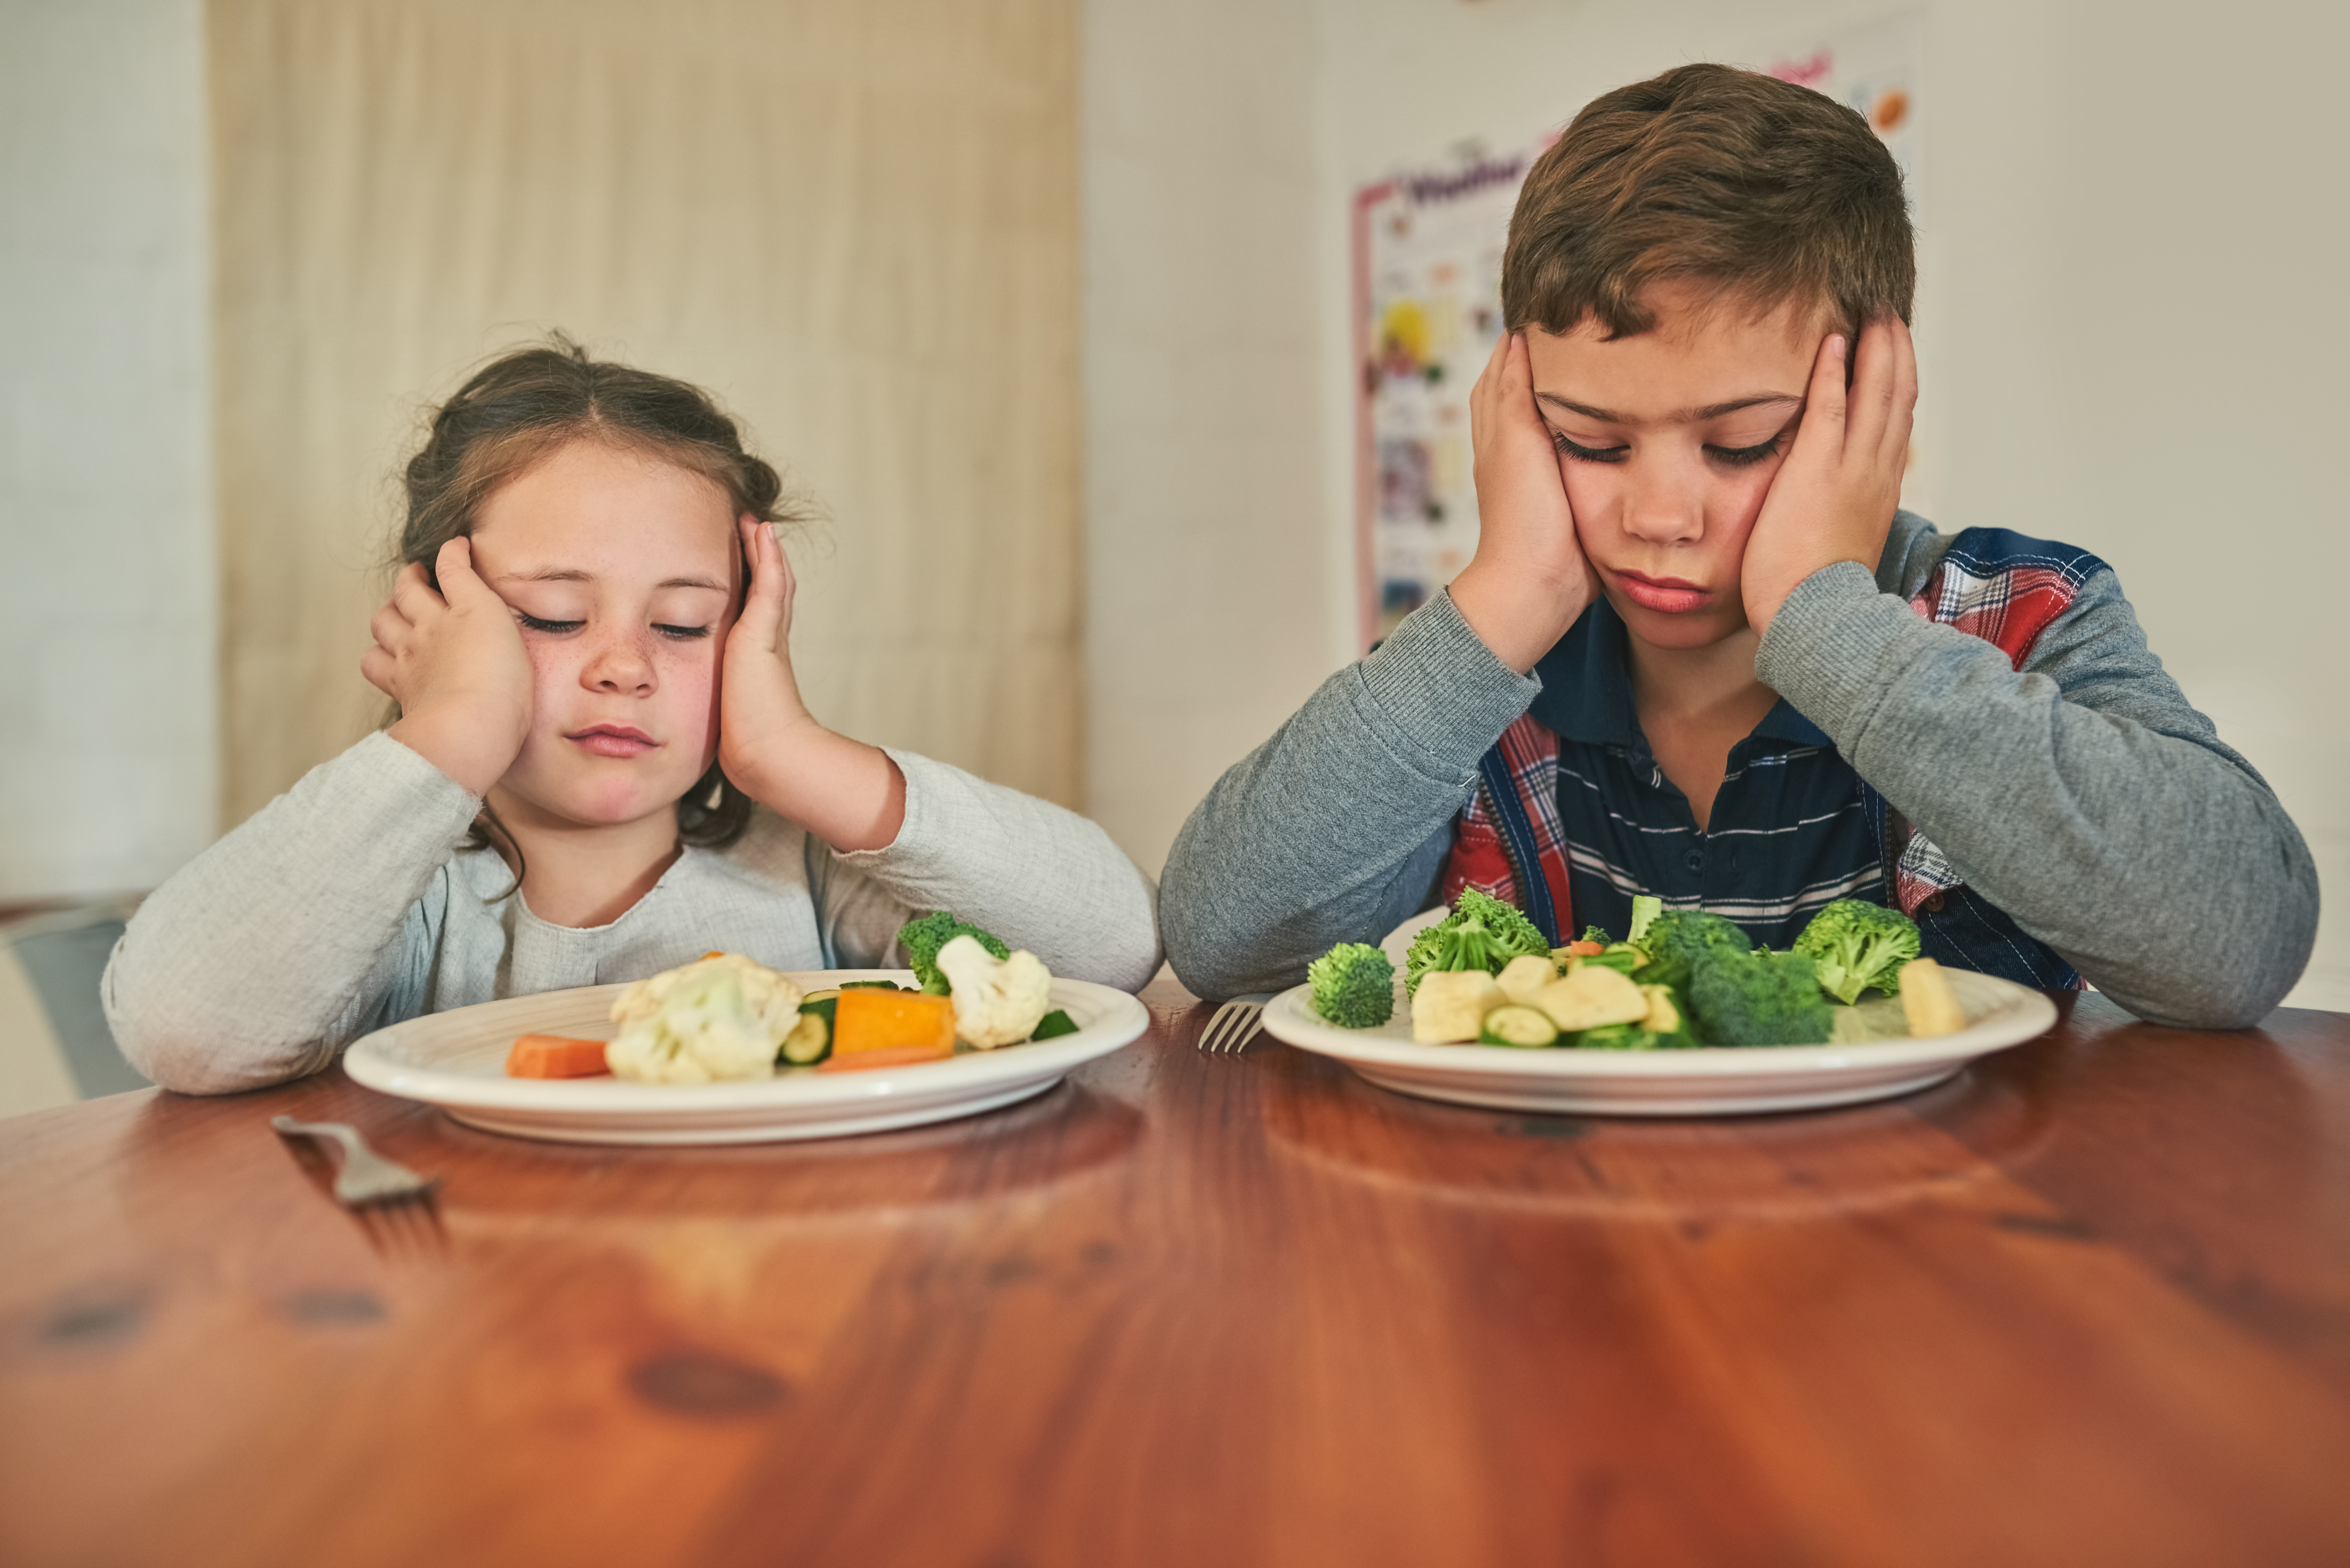 A little girl and boy looking disappointed at their plates with vegetables